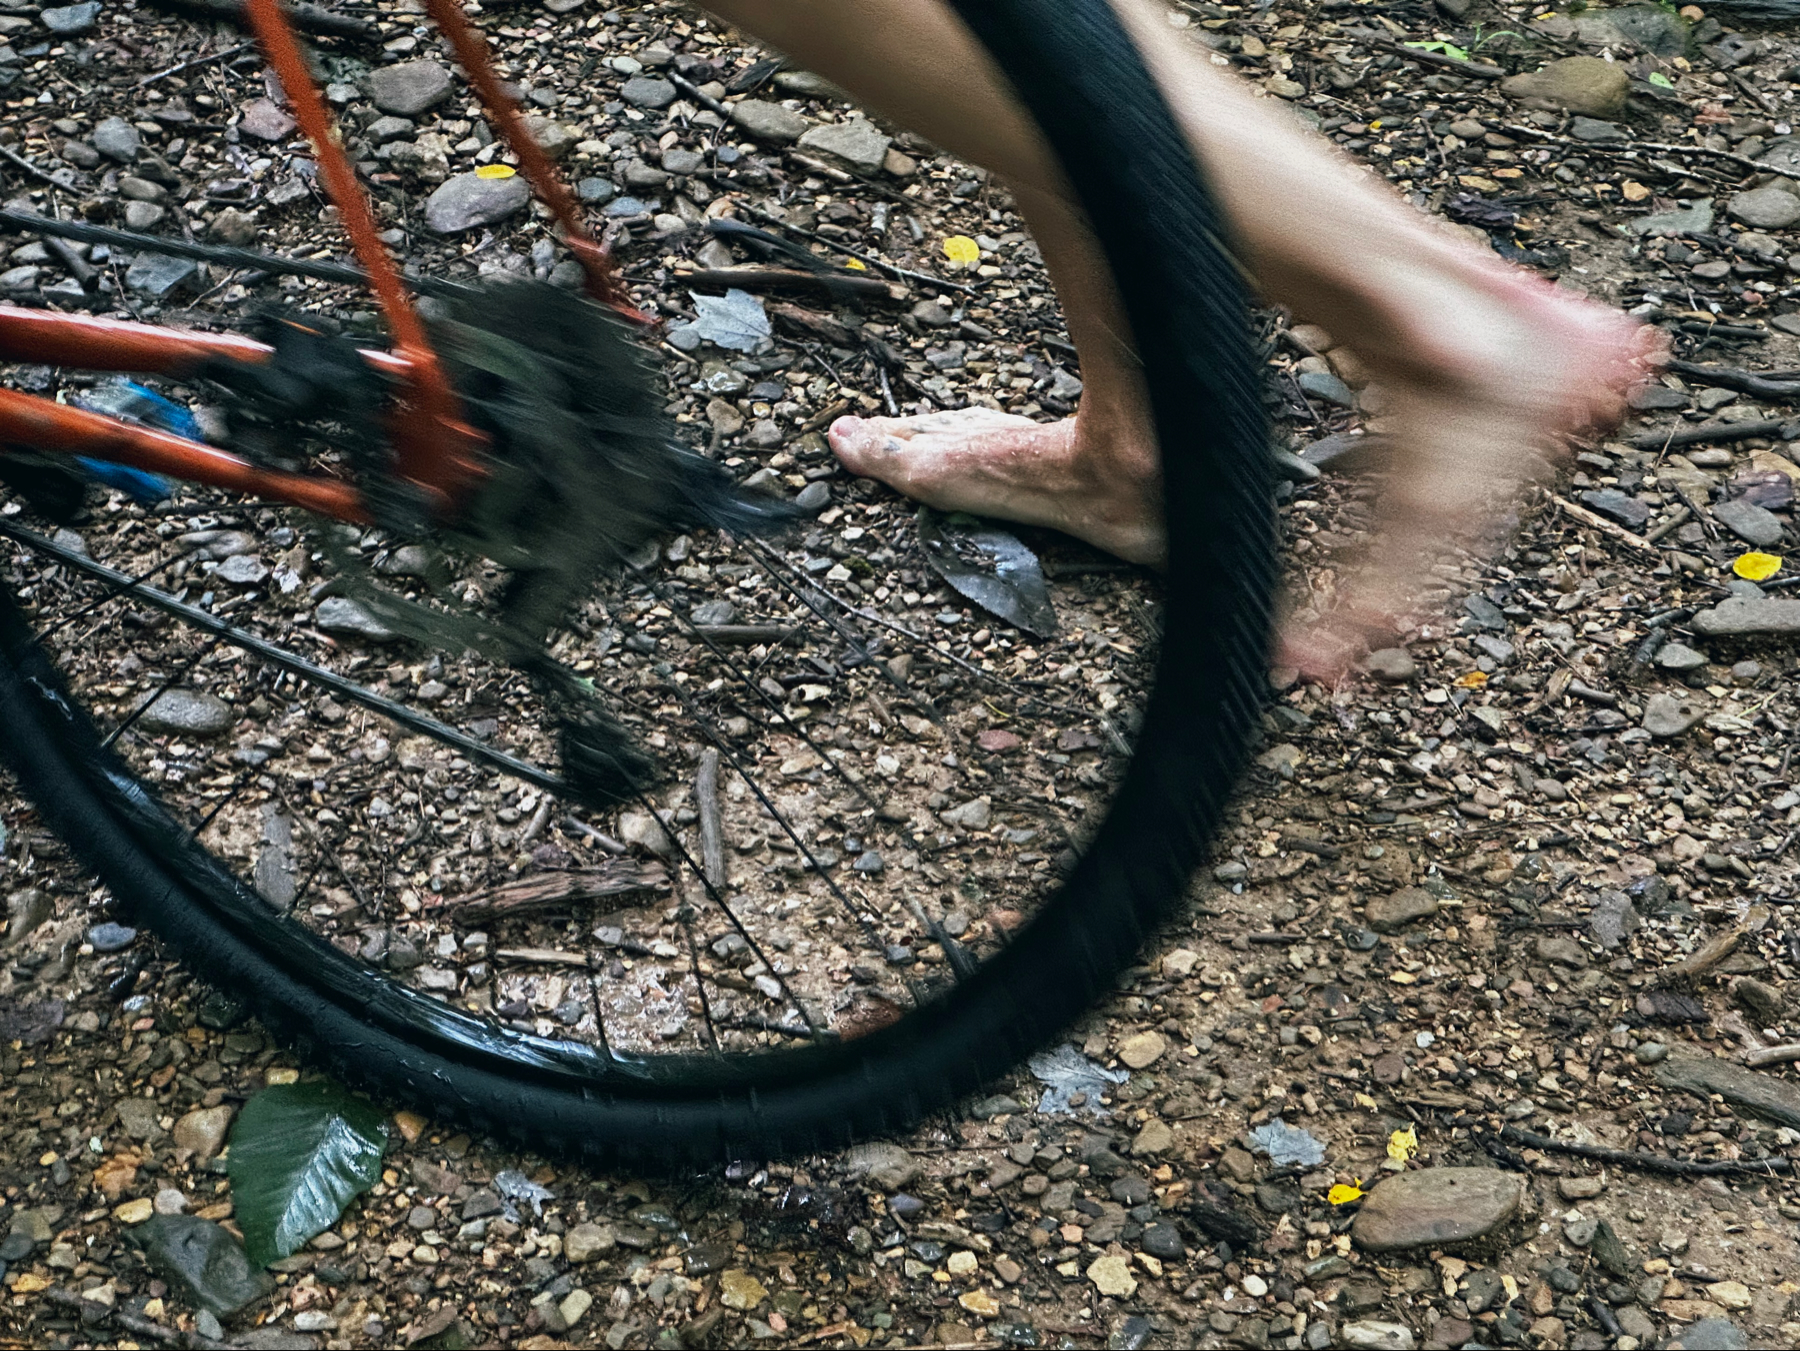 Bare feet and a bicycle after a creek crossing.